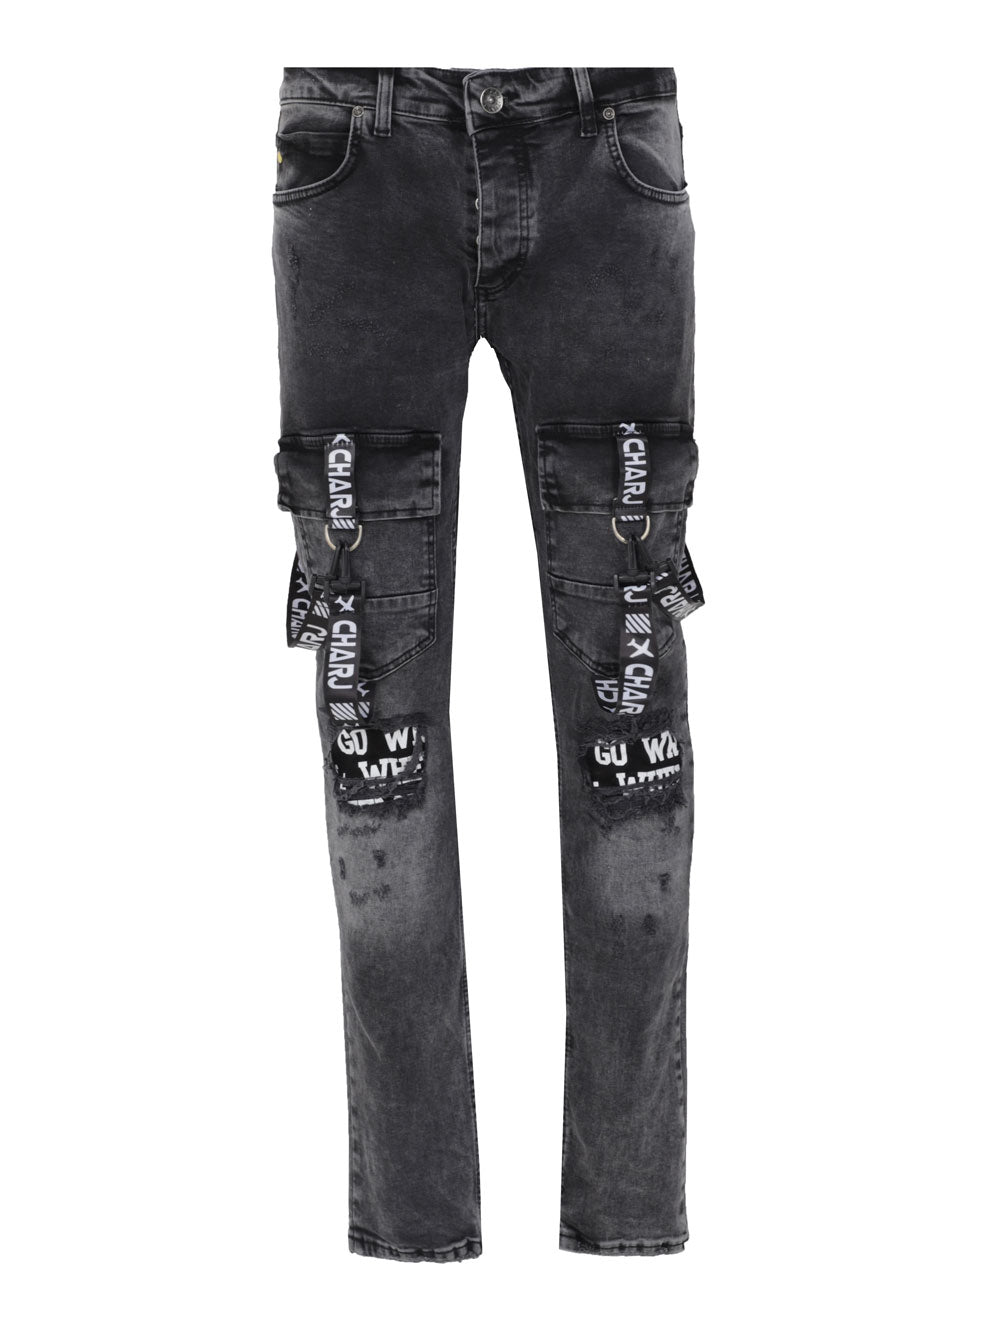 A pair of TORNADO BLACK jeans with patches on them, made from elastic fabric.